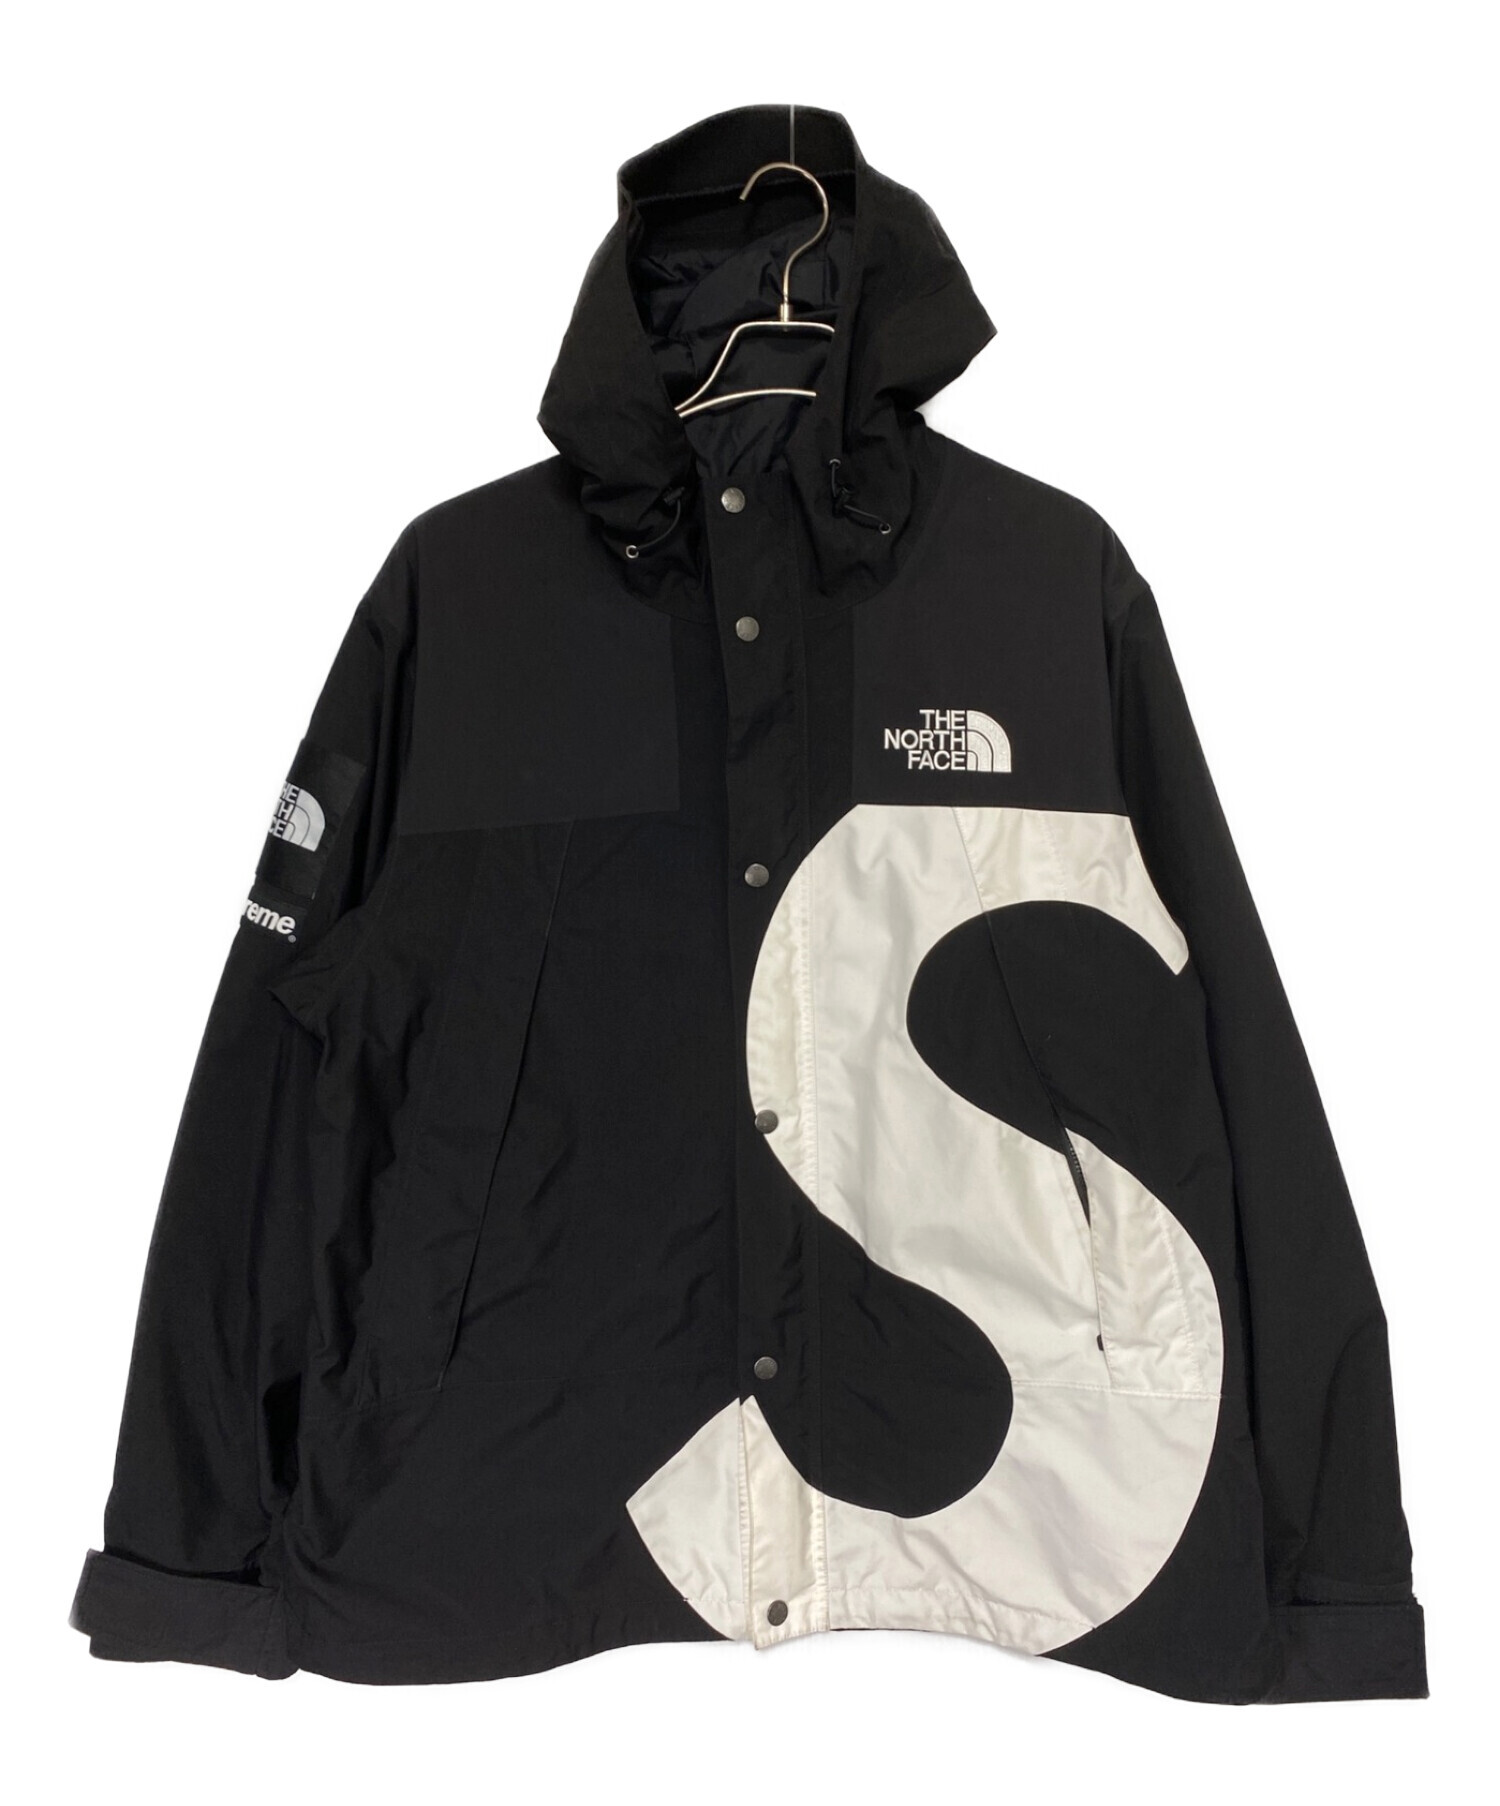 Supreme The North Face Mountain Jacket S